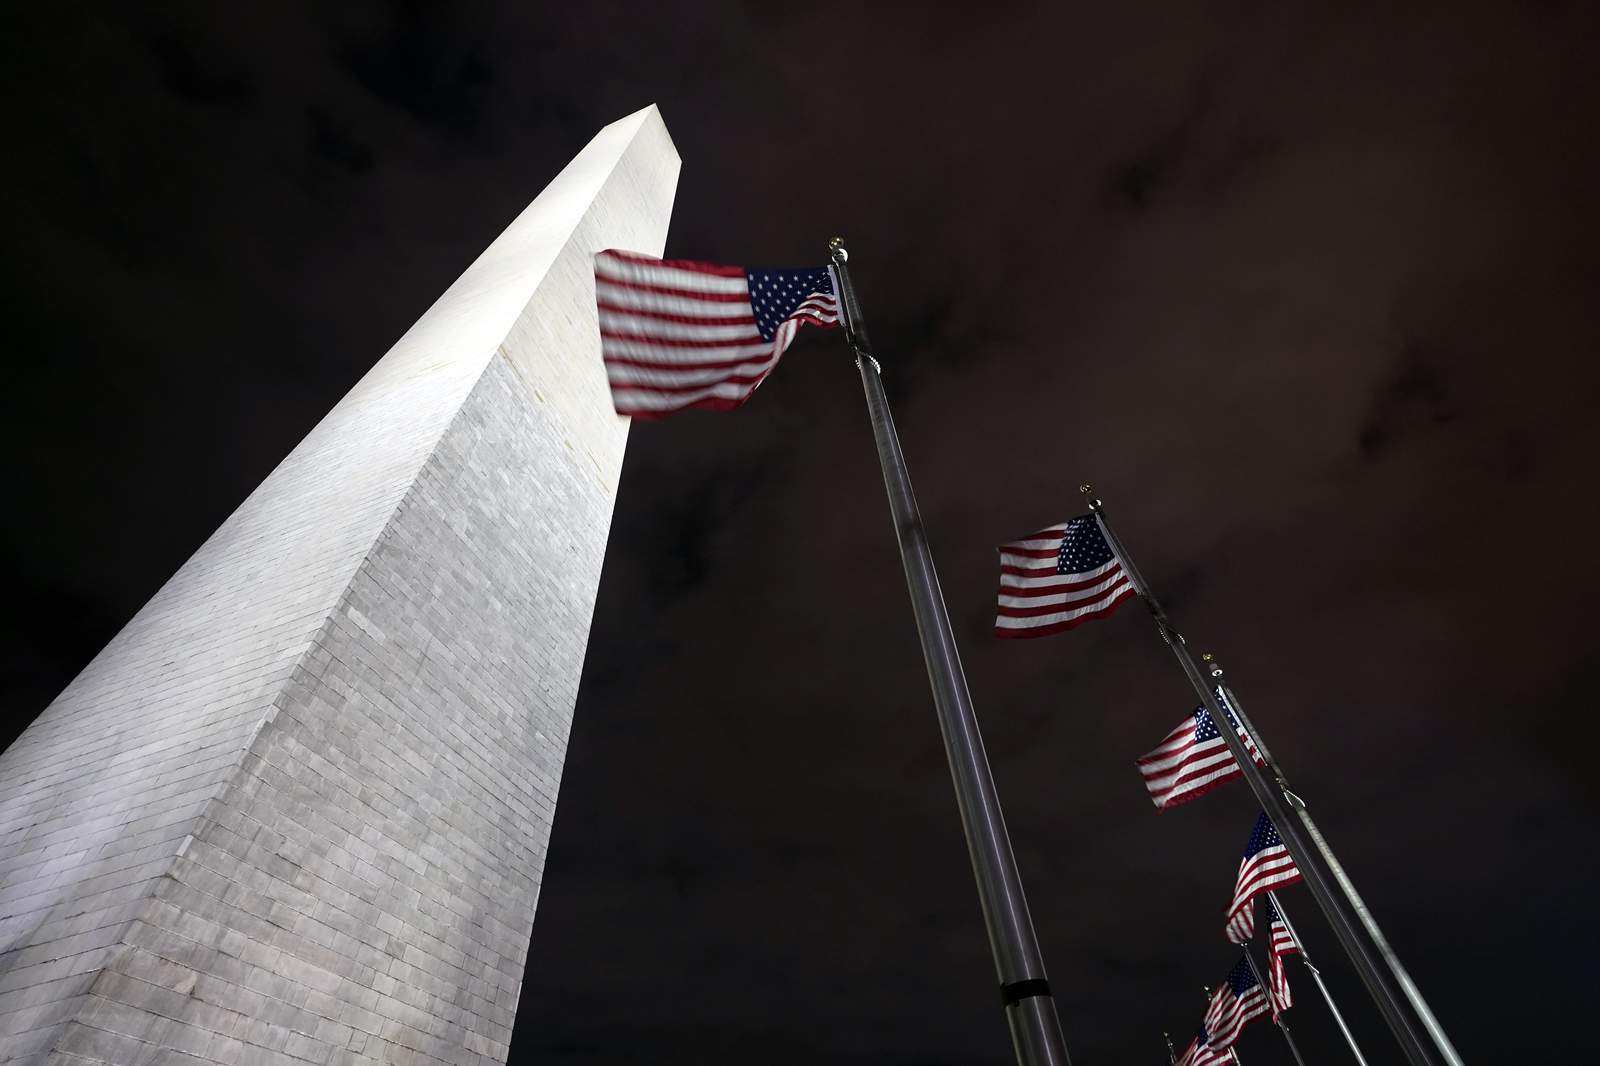 Visit by COVID-infected official closes Washington Monument